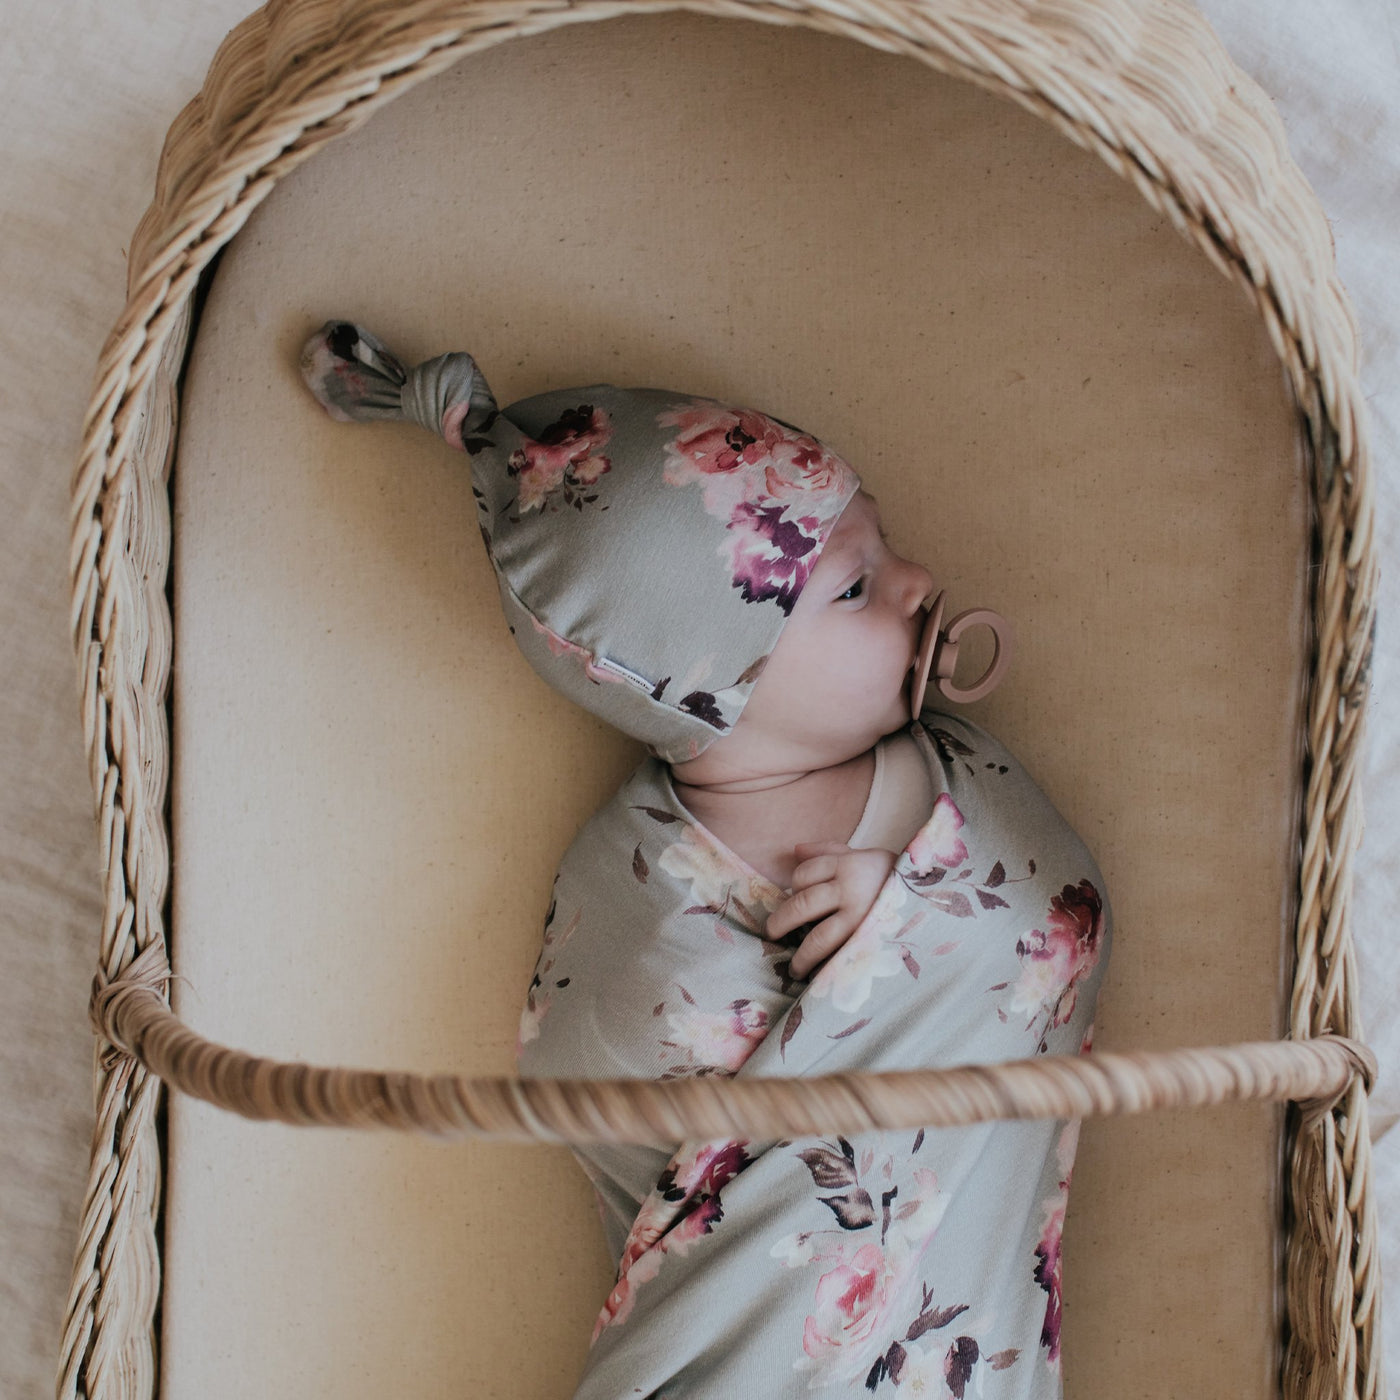 Baby laying in bassinet wearing matching floral swaddle and top knot beanie